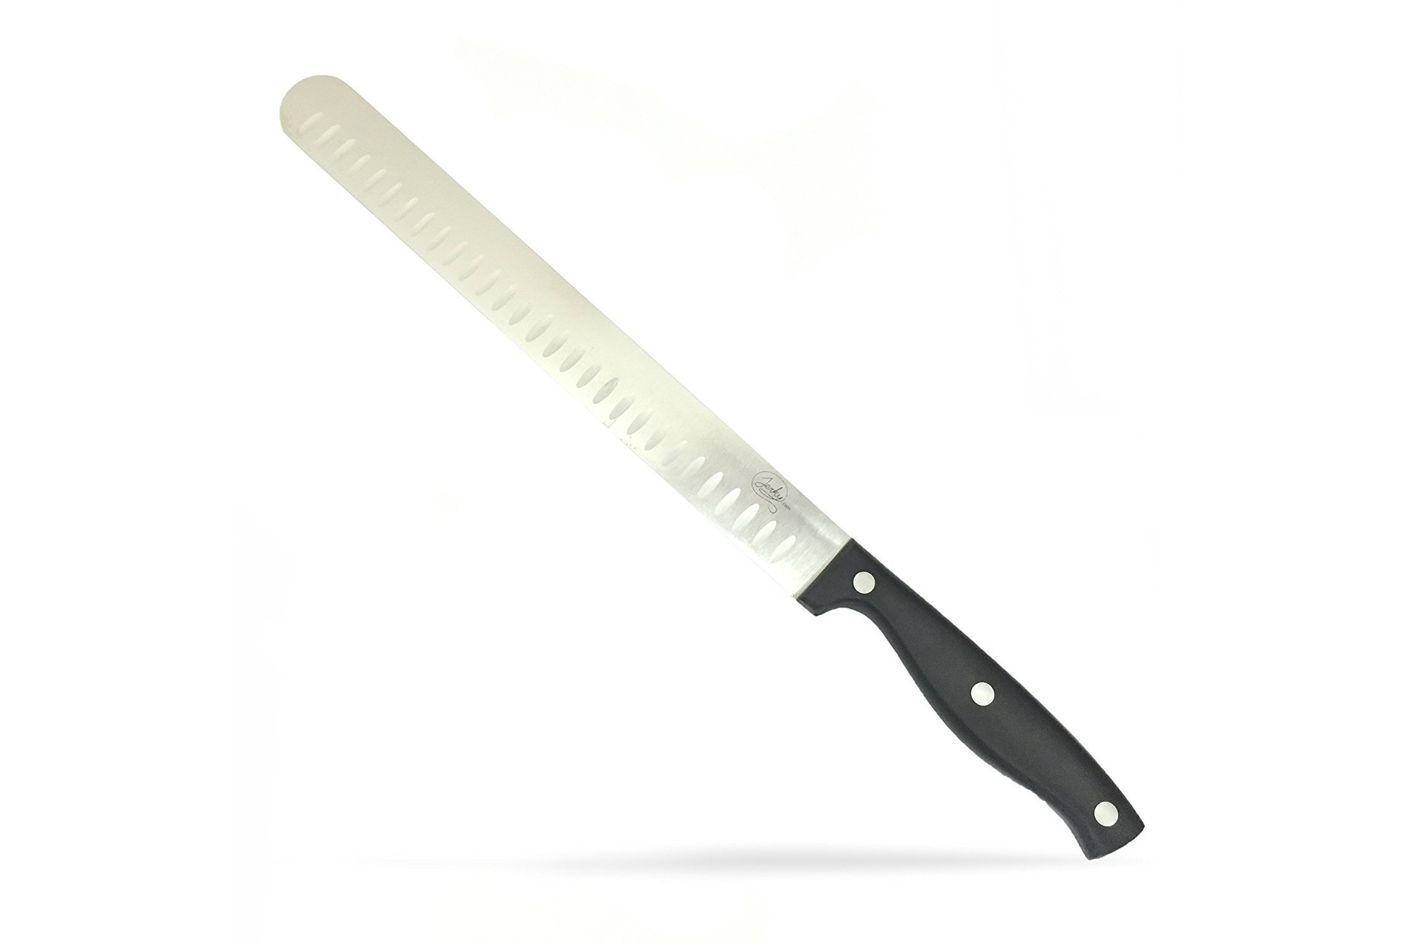 carving knife